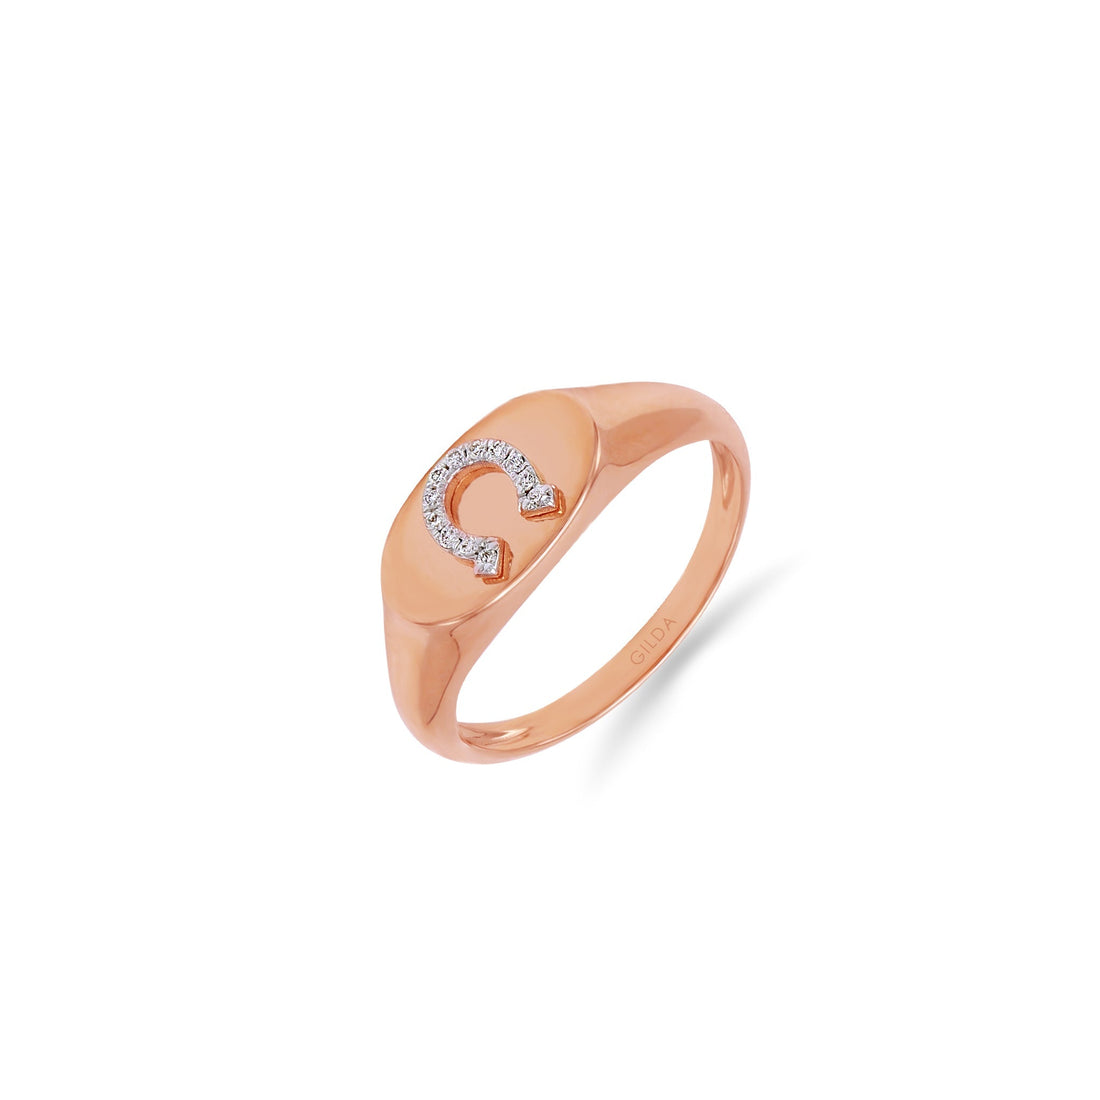 Jewelry Minnies | Diamond Ring | 0.04 Cts. | 14K Gold - Rose / 6 / Diamonds - ring Zengoda Shop online from